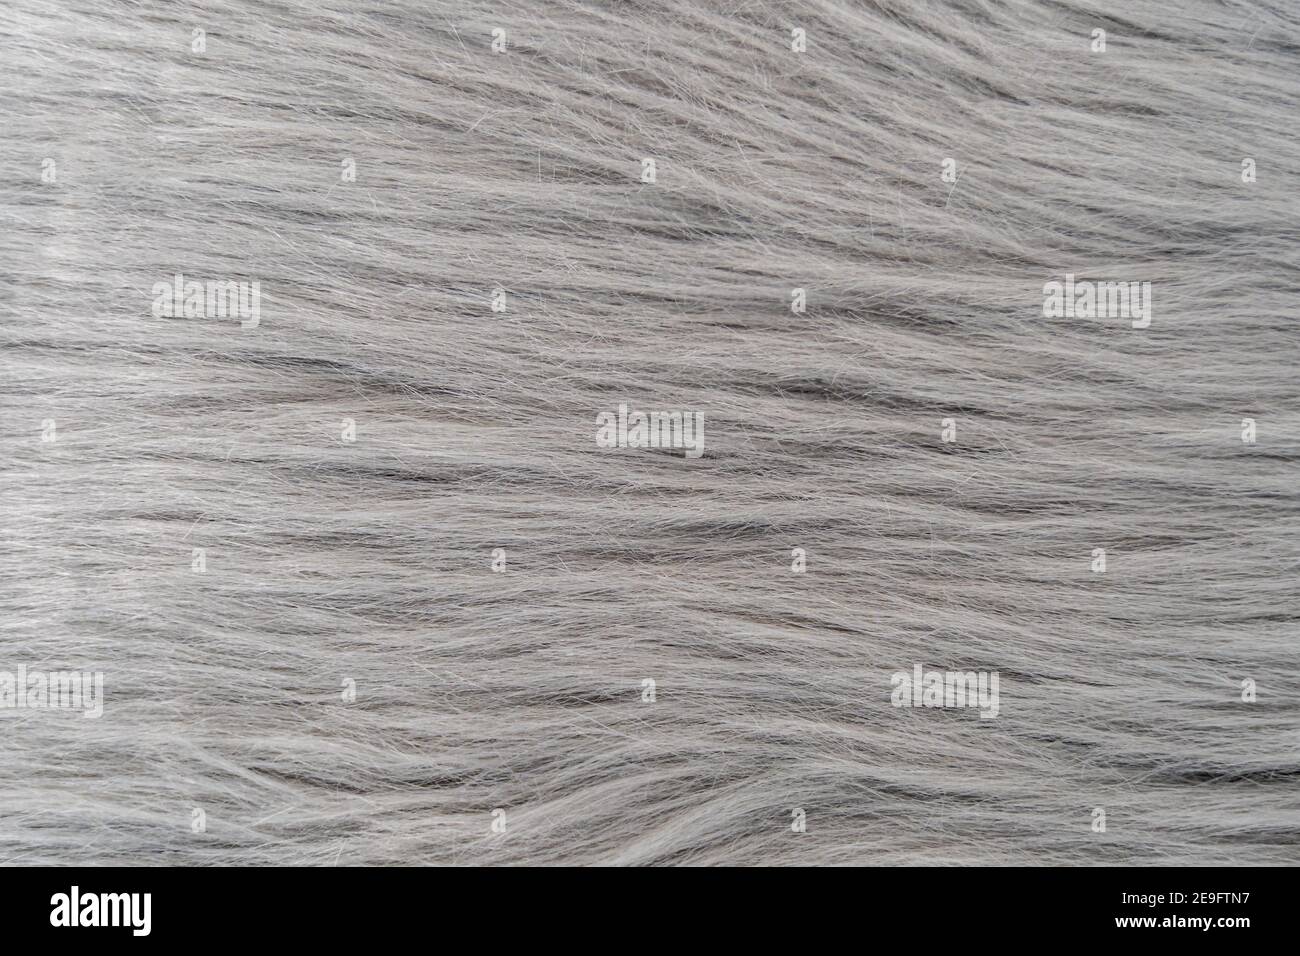 Grey fur rug texture of a textile with long fibers. Natural structure of a soft fabric decoration surface. Fluffy detail looking like animal hair Stock Photo